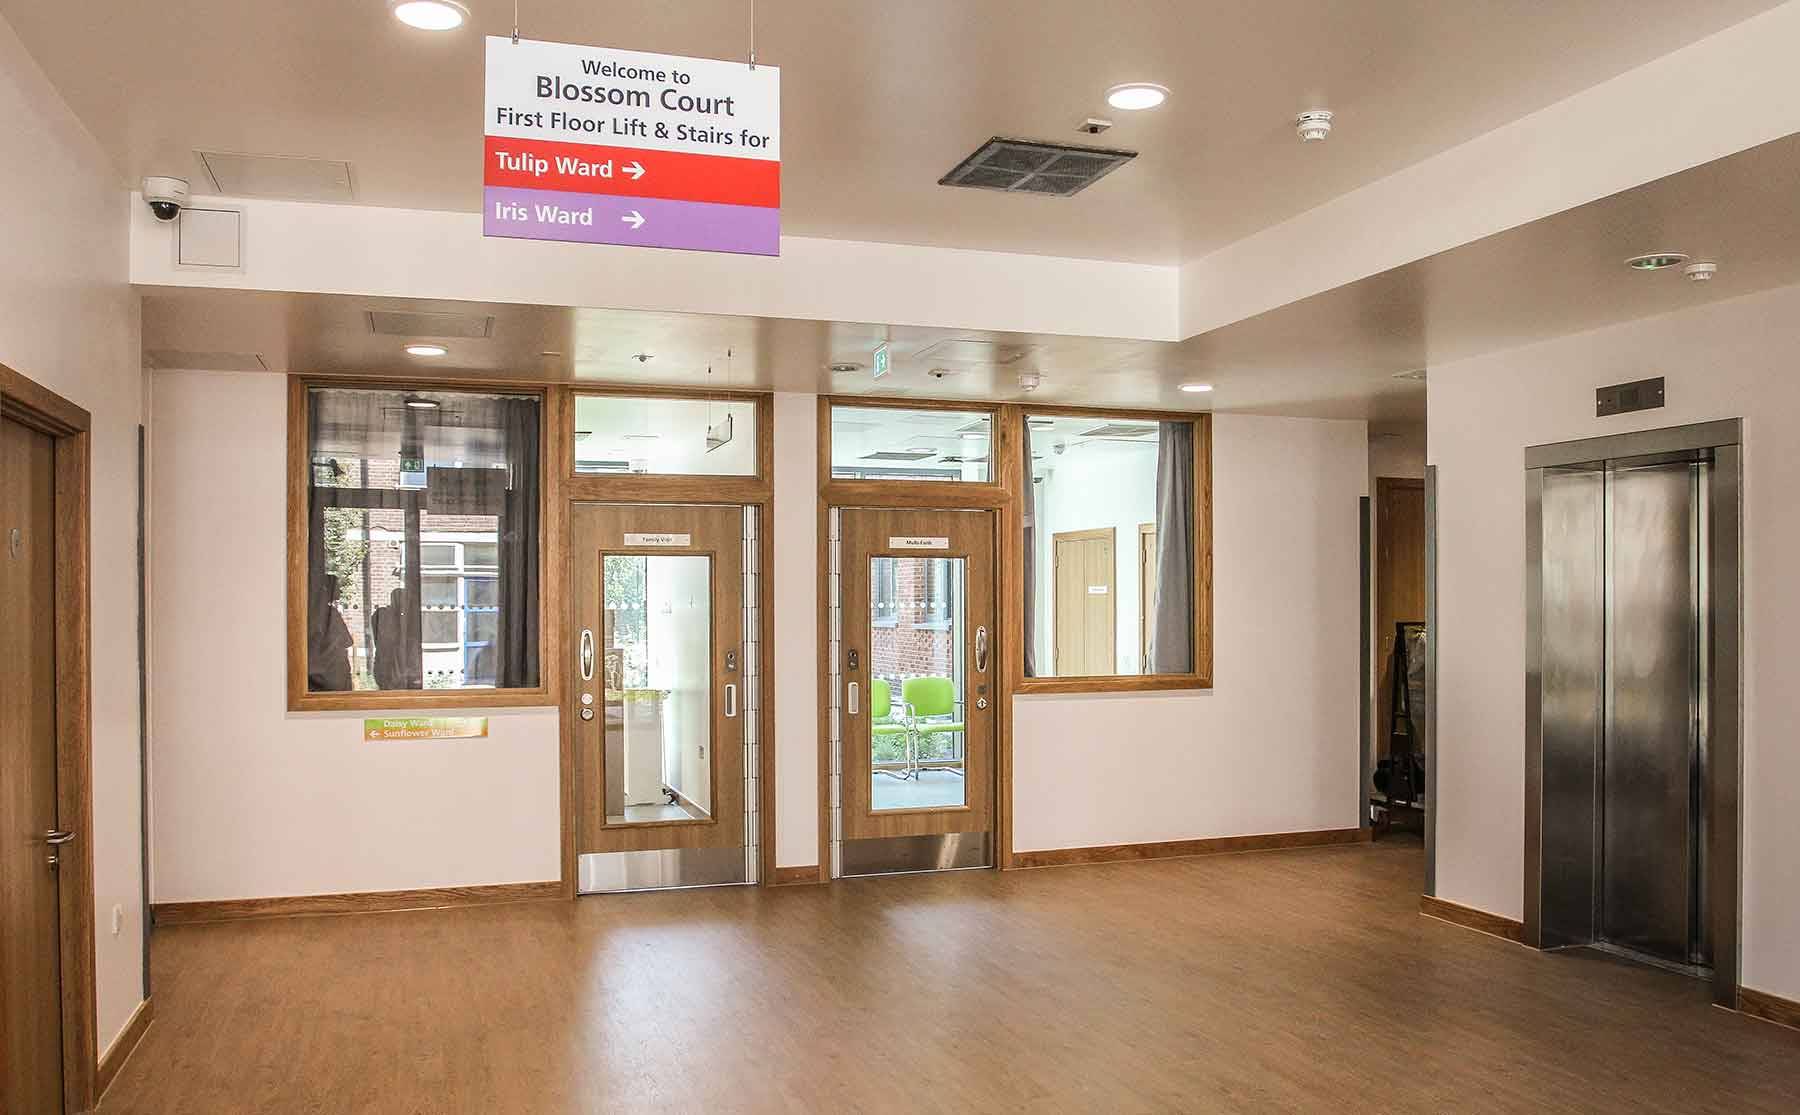 interior photo of entrance to st anns hospital in tottenham